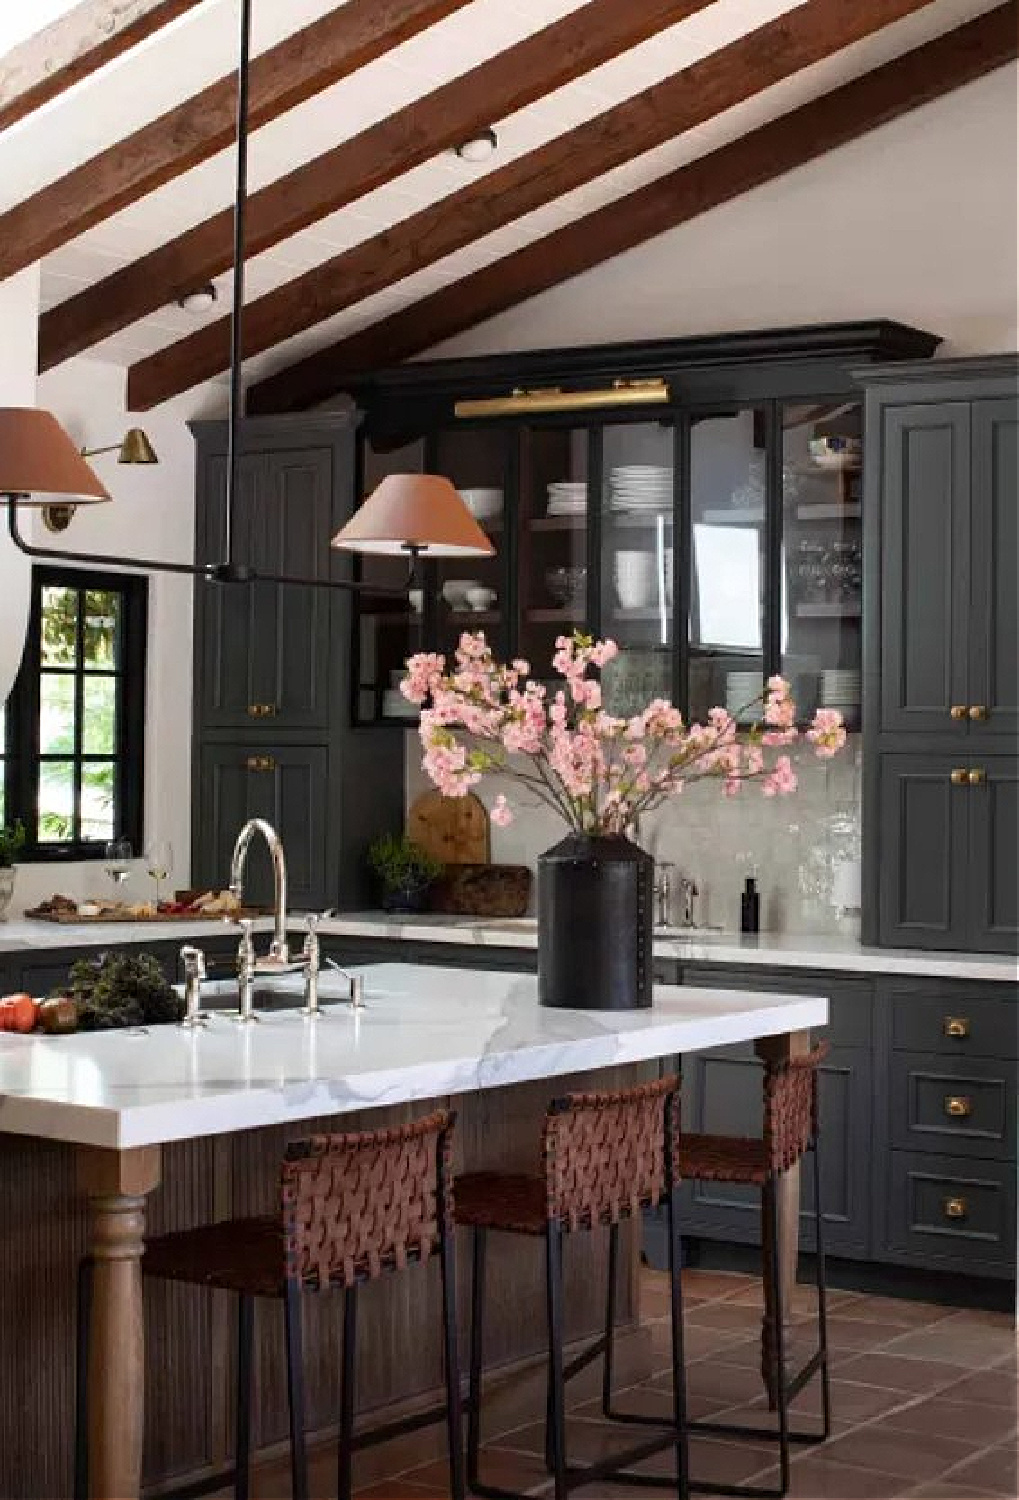 Park and Oak designed beautiful kitchen with deep blue-black cabinets, rustic wood beams, and classic traditional details. #blackcabinets #sophisticatedkitchen